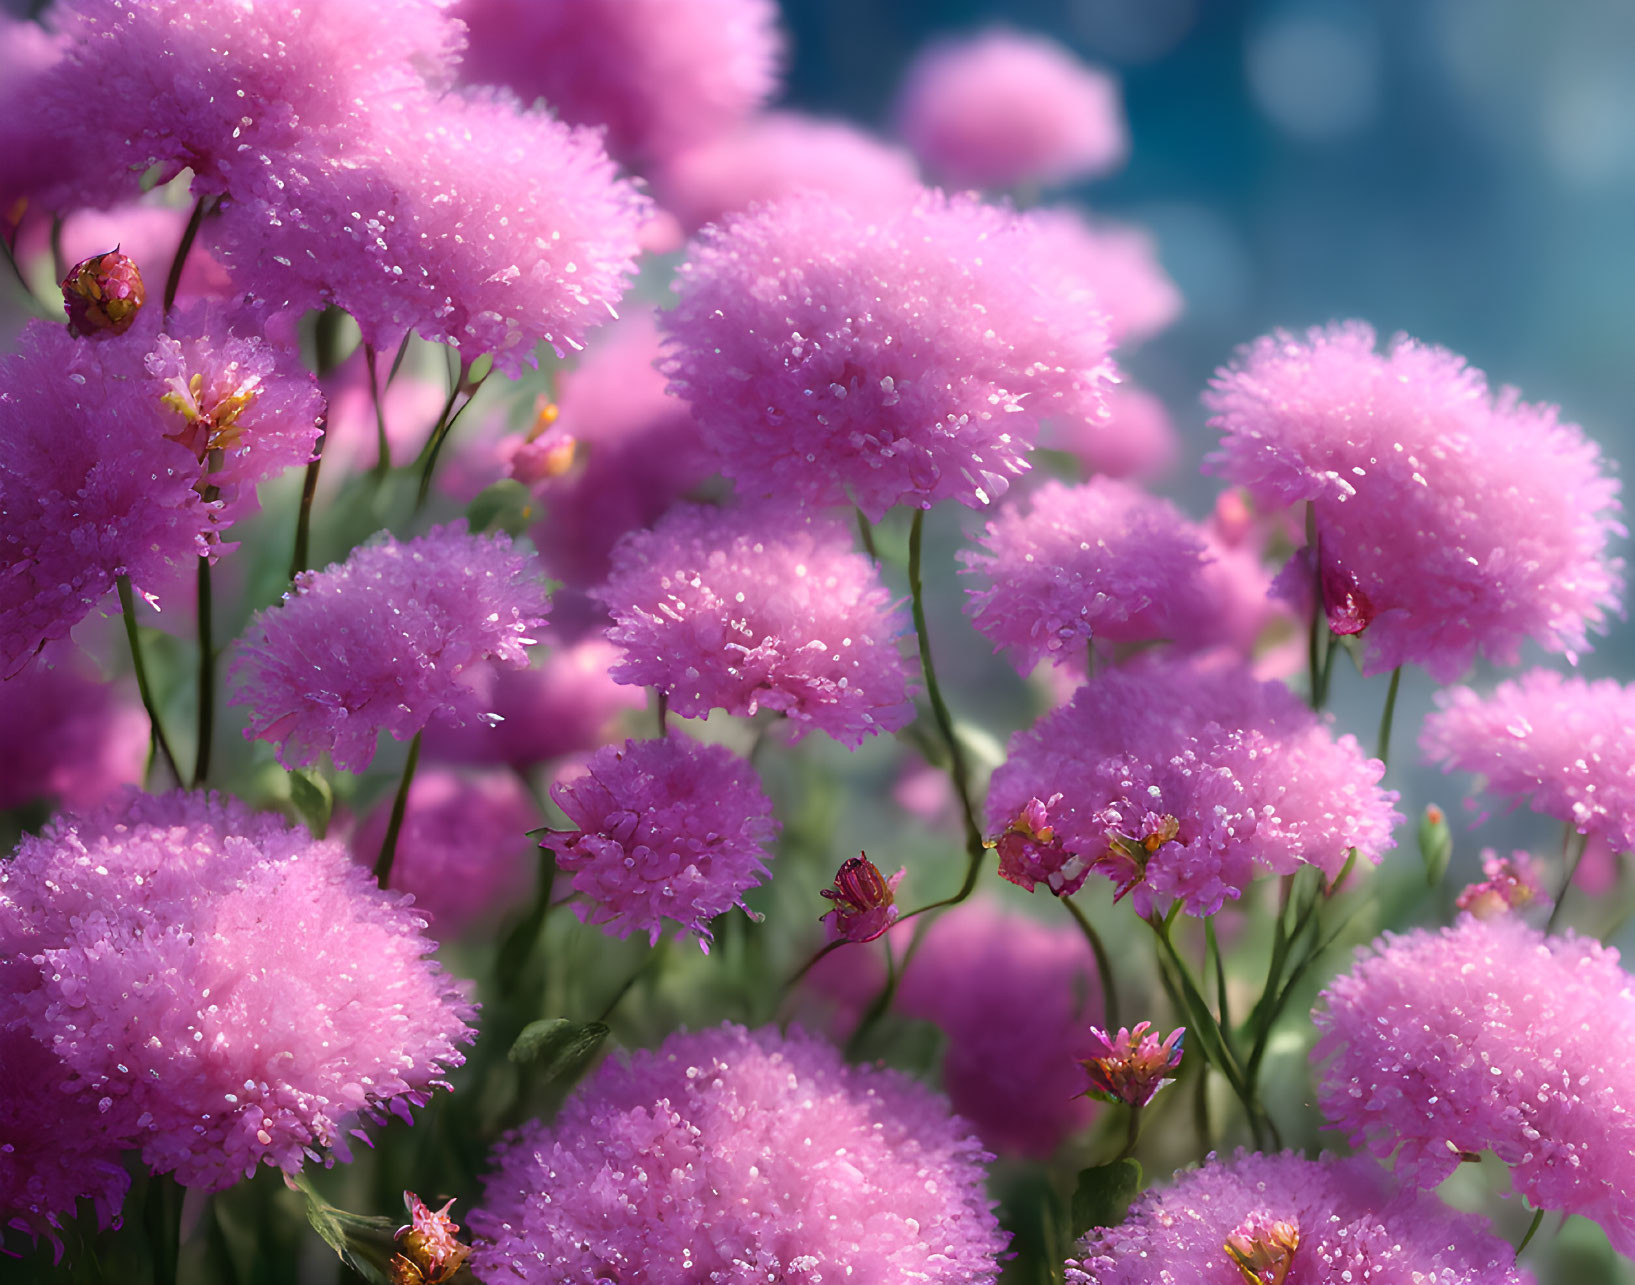 Pink Fluffy Flowers with Dew Drops on Blue Bokeh Background